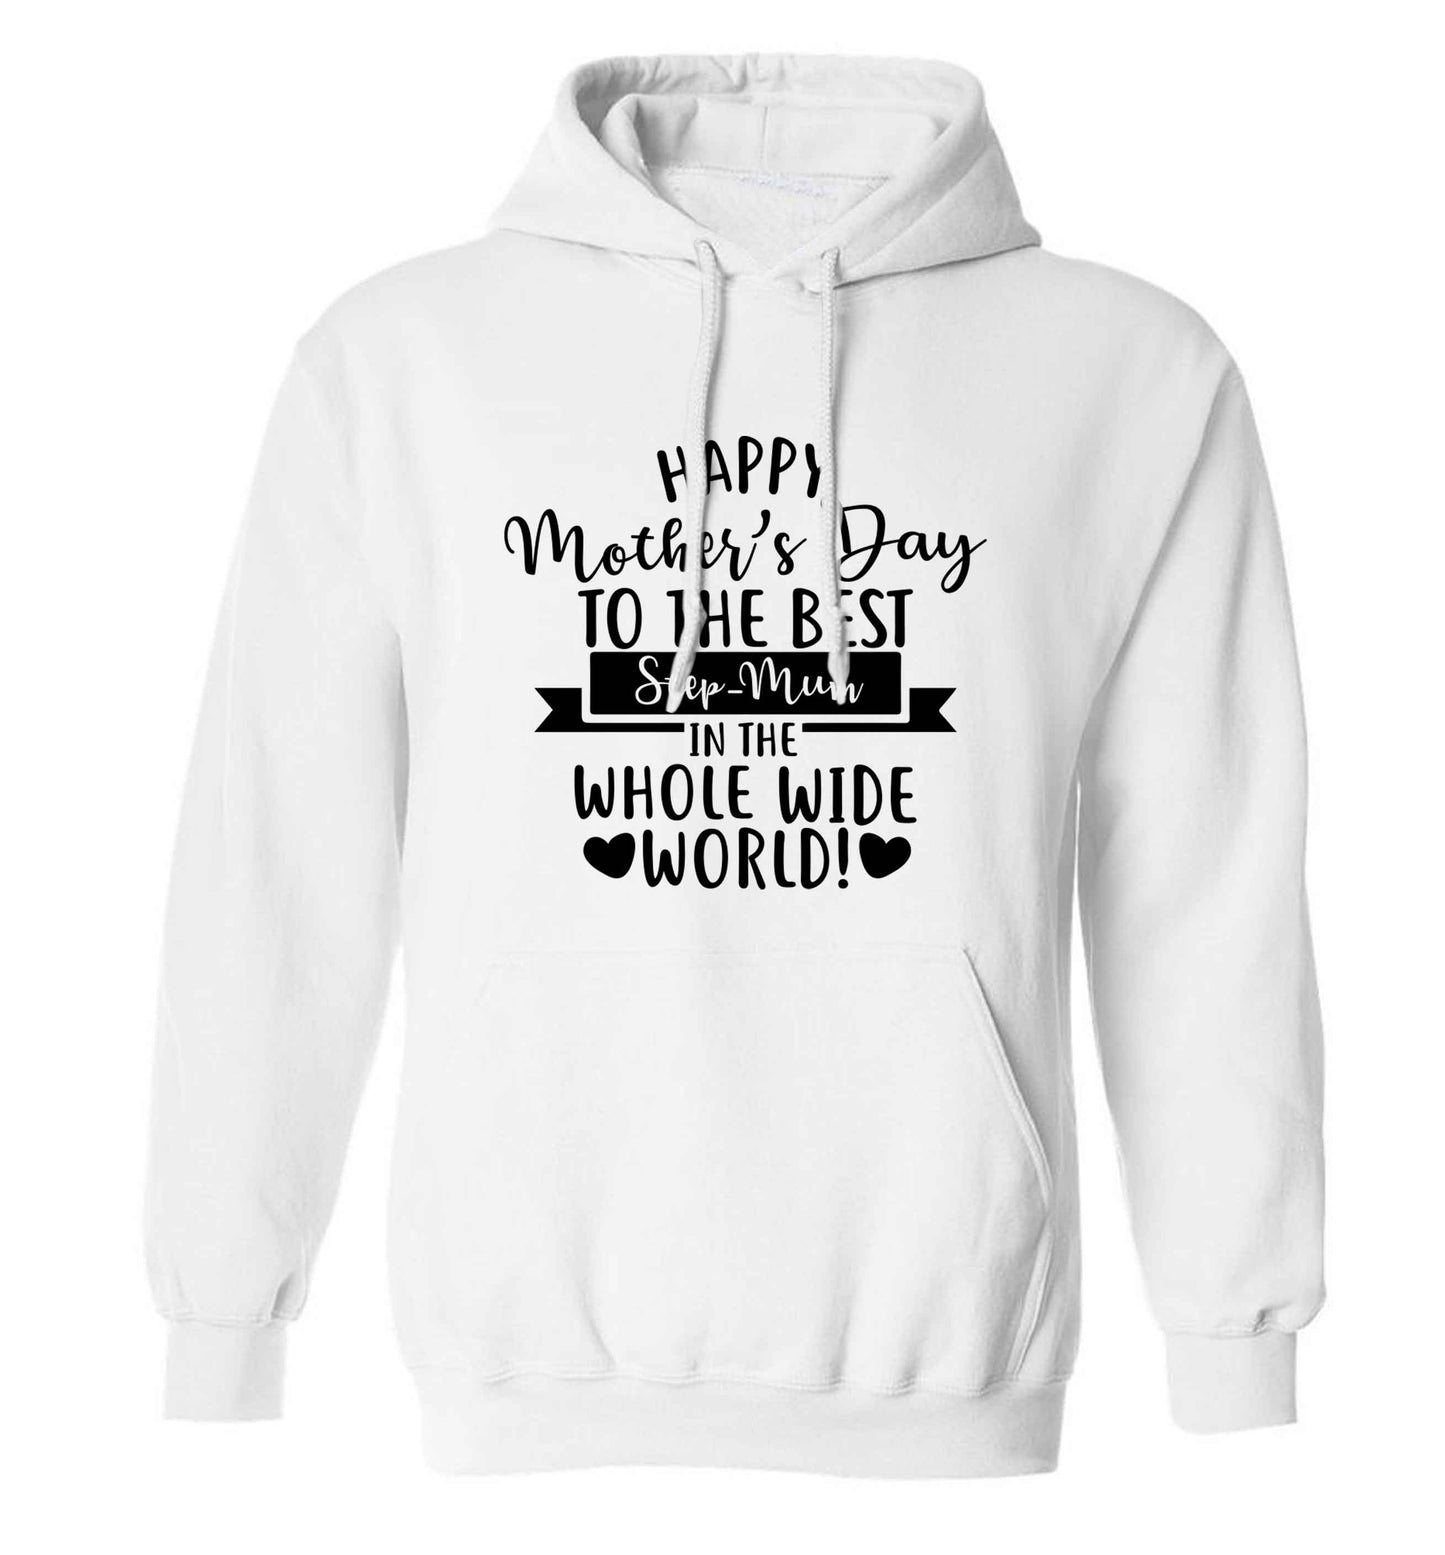 Happy mother's day to the best step-mum in the world adults unisex white hoodie 2XL